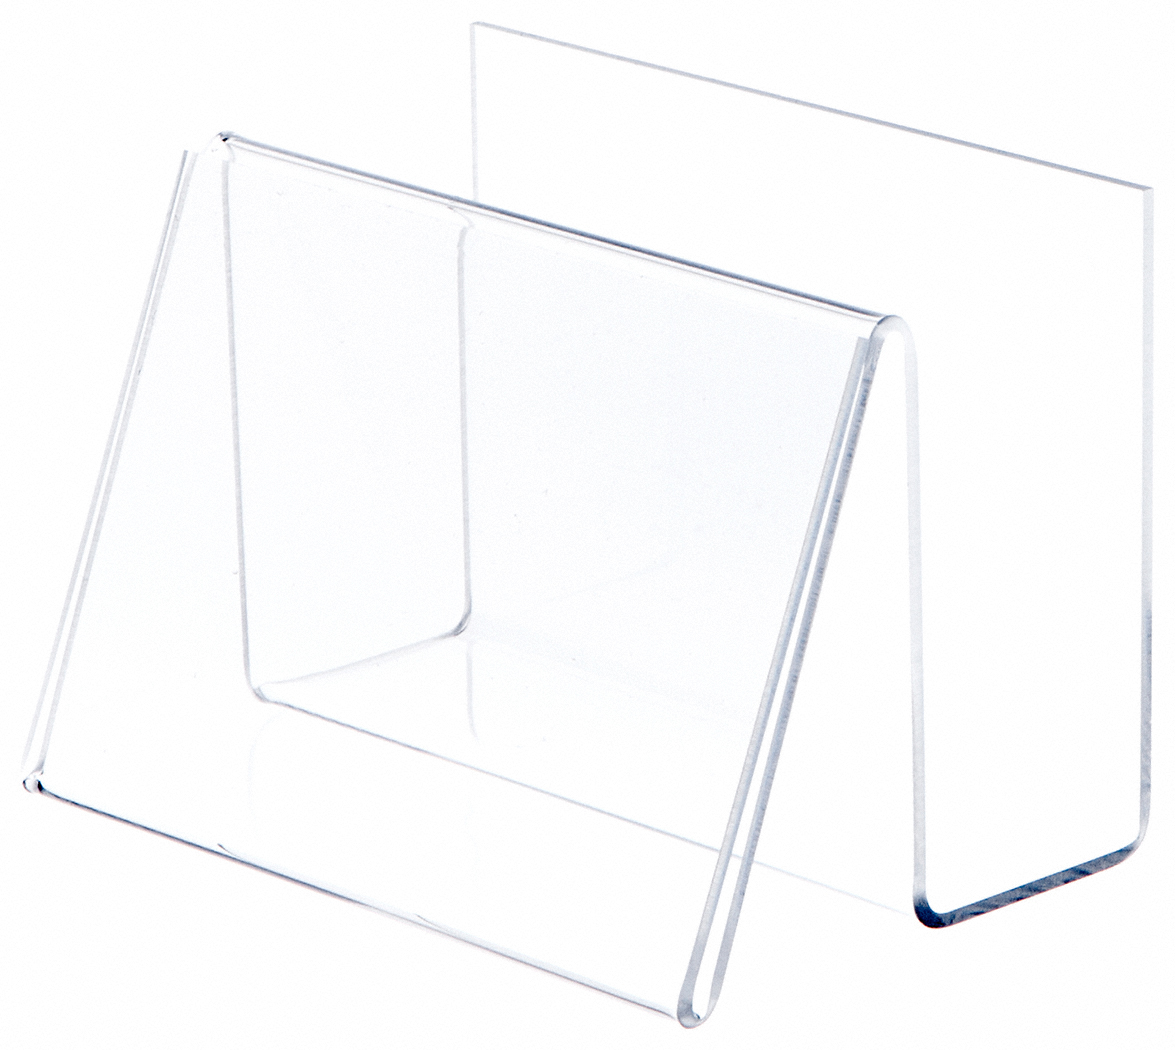 Plymor Clear Acrylic Deluxe Postcard Holder & Display (Horizontal), 6" W x 4.25" D x 4.5" H